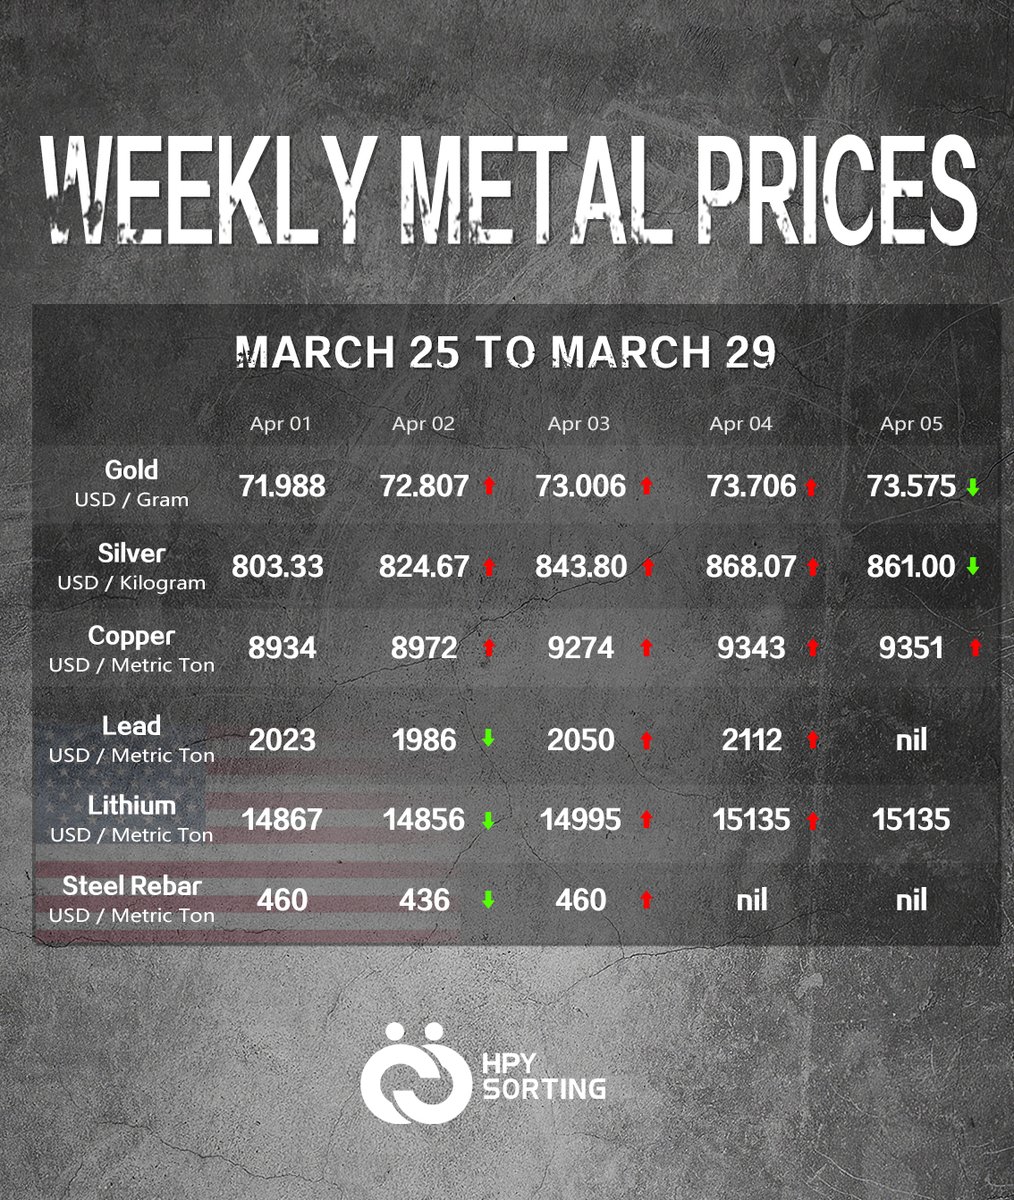 #MetalPricing March 25th-29th

#Gold #Silver #Copper #Lead #Lithium #Steel #Mining #mineralexploration #oresorting #Metal #miningindustry #Monday